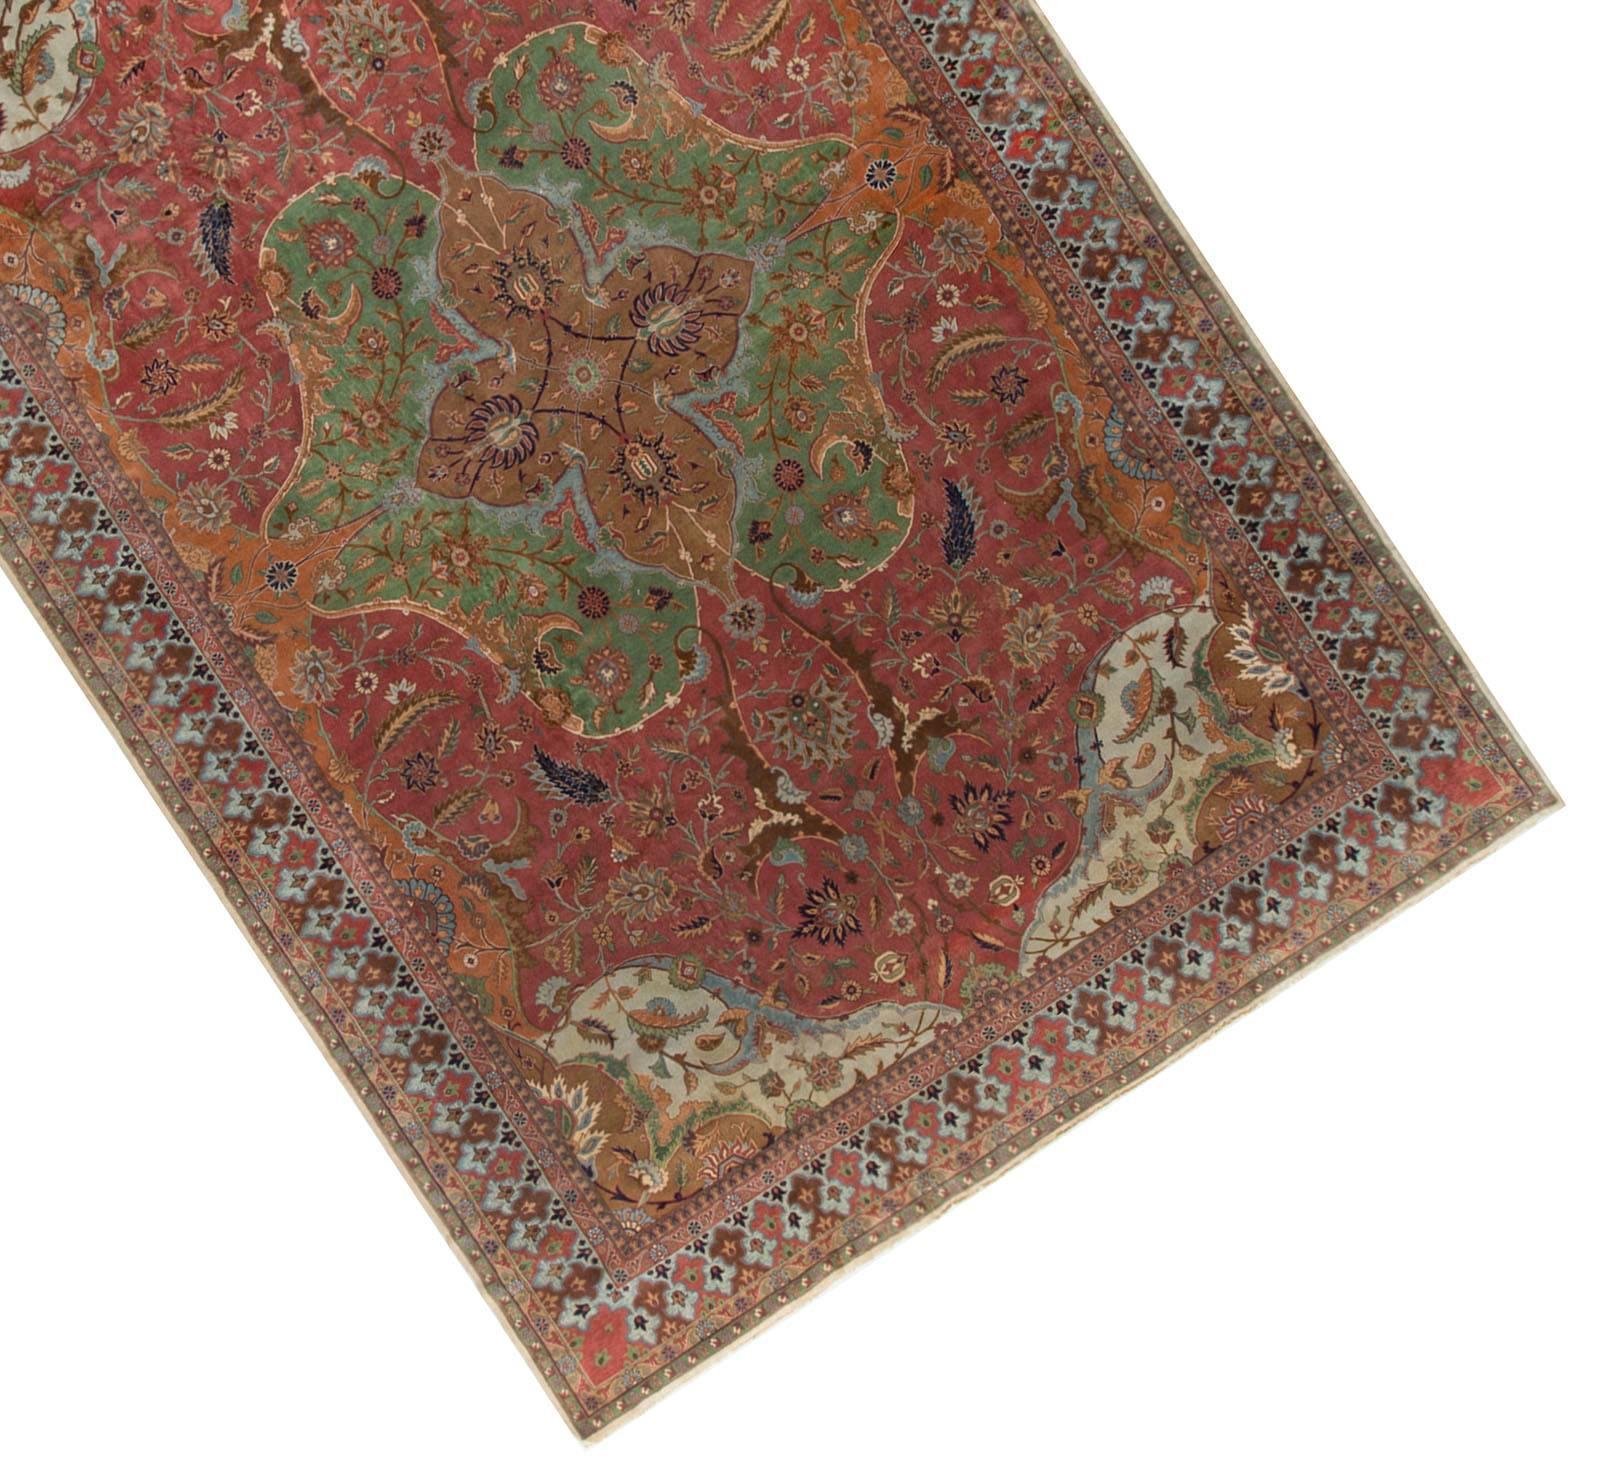 Large Vintage Turkish Sivas Rug circa 1940 11'8 x 17'7 In Good Condition For Sale In Secaucus, NJ